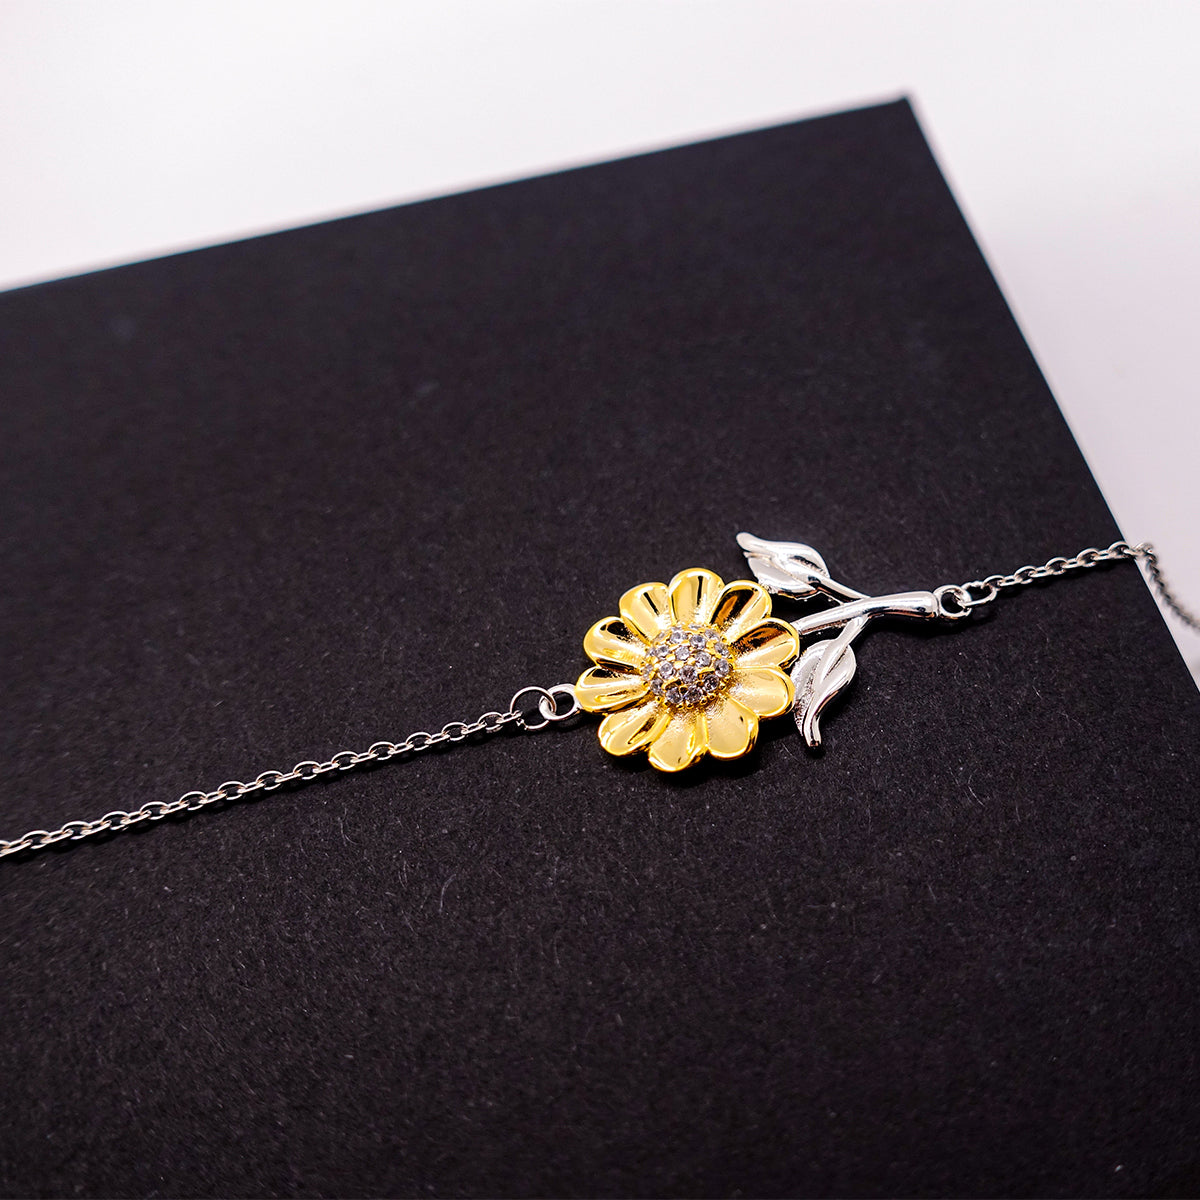 Grandmother Sunflower Bracelet - Youll always have a special place in my heart - Unique Gift for Grandparents, Mothers Day, Birthday, and Holidays